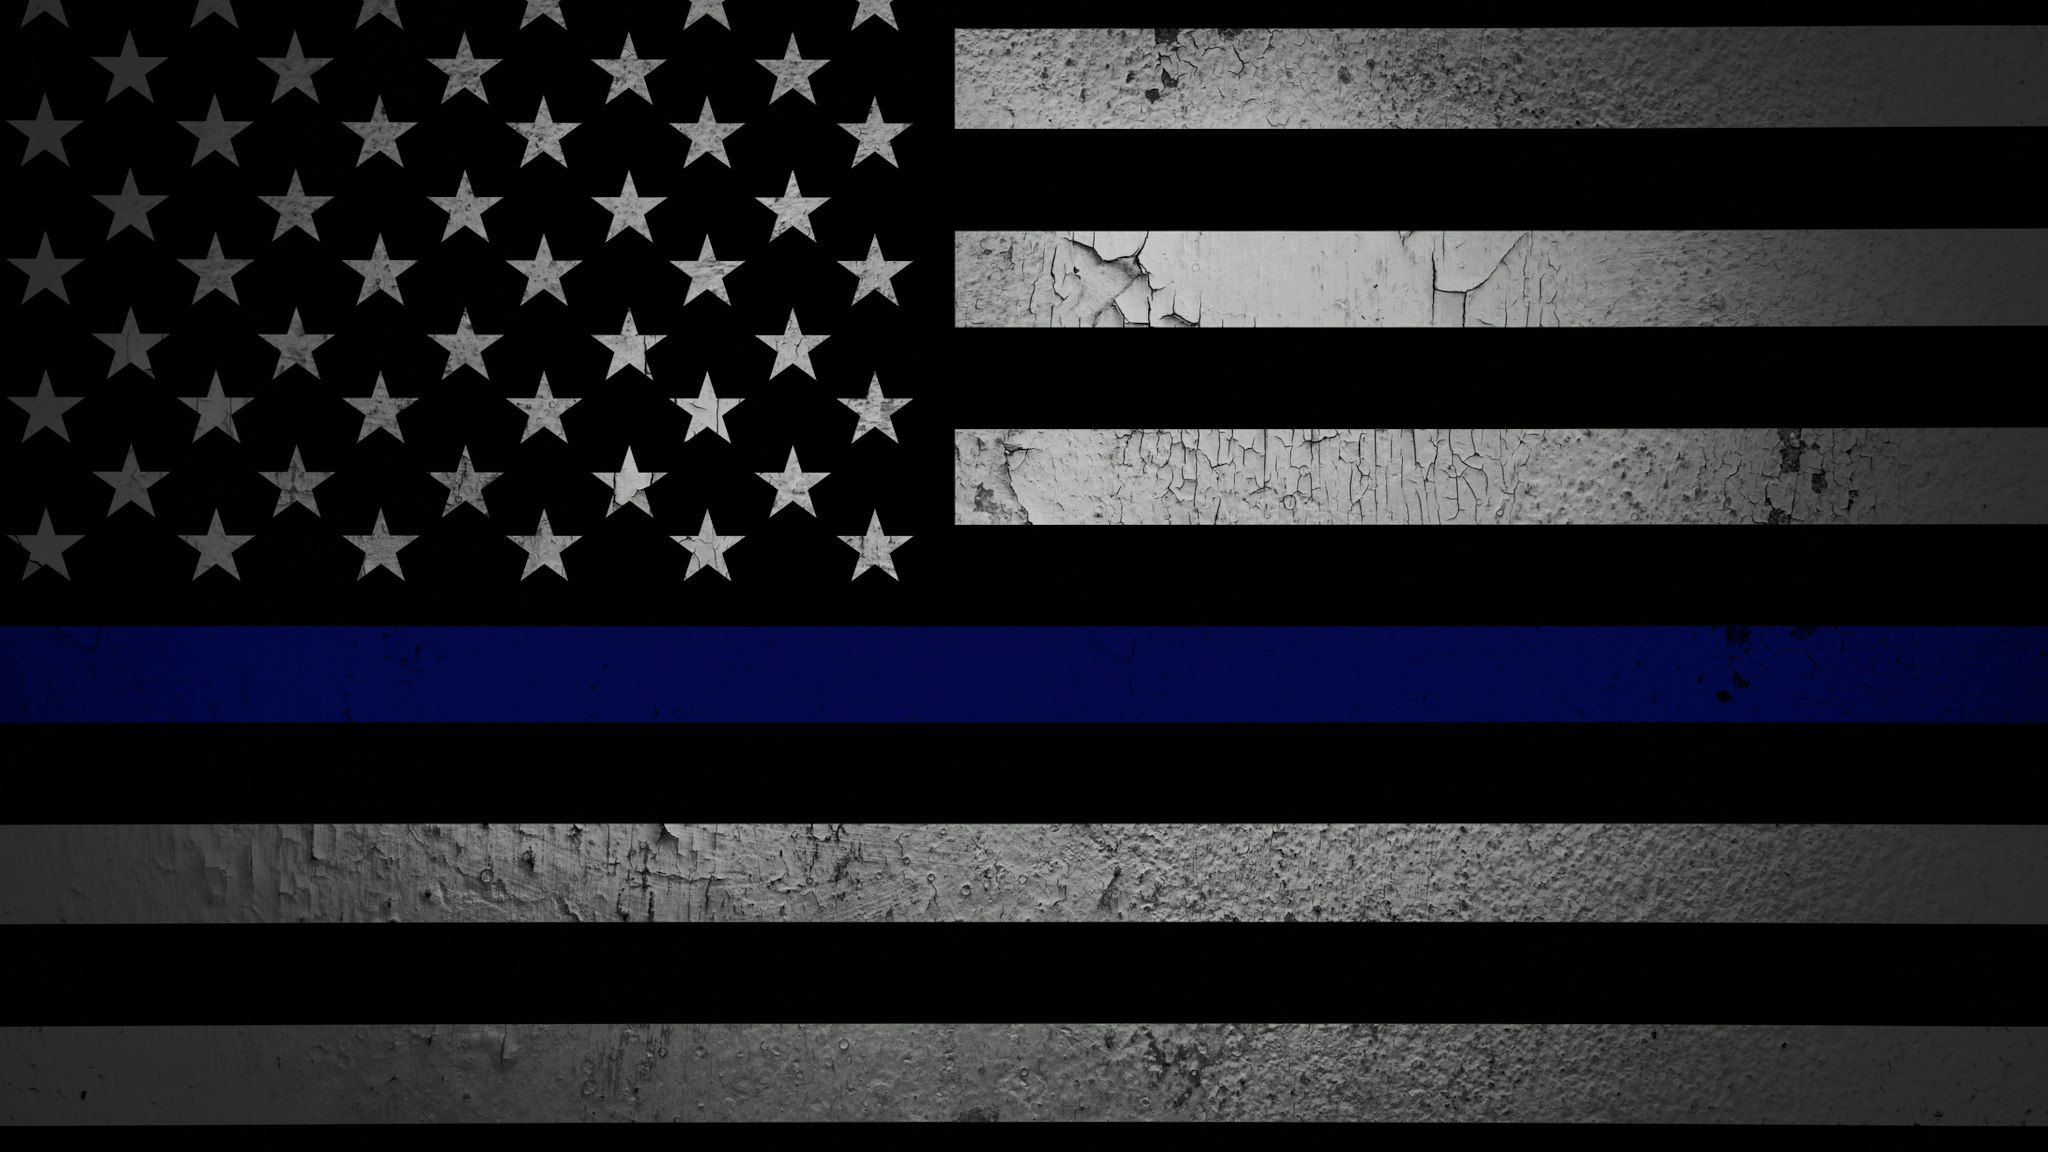 An American flag symbolic of support for law enforcement - stock photo